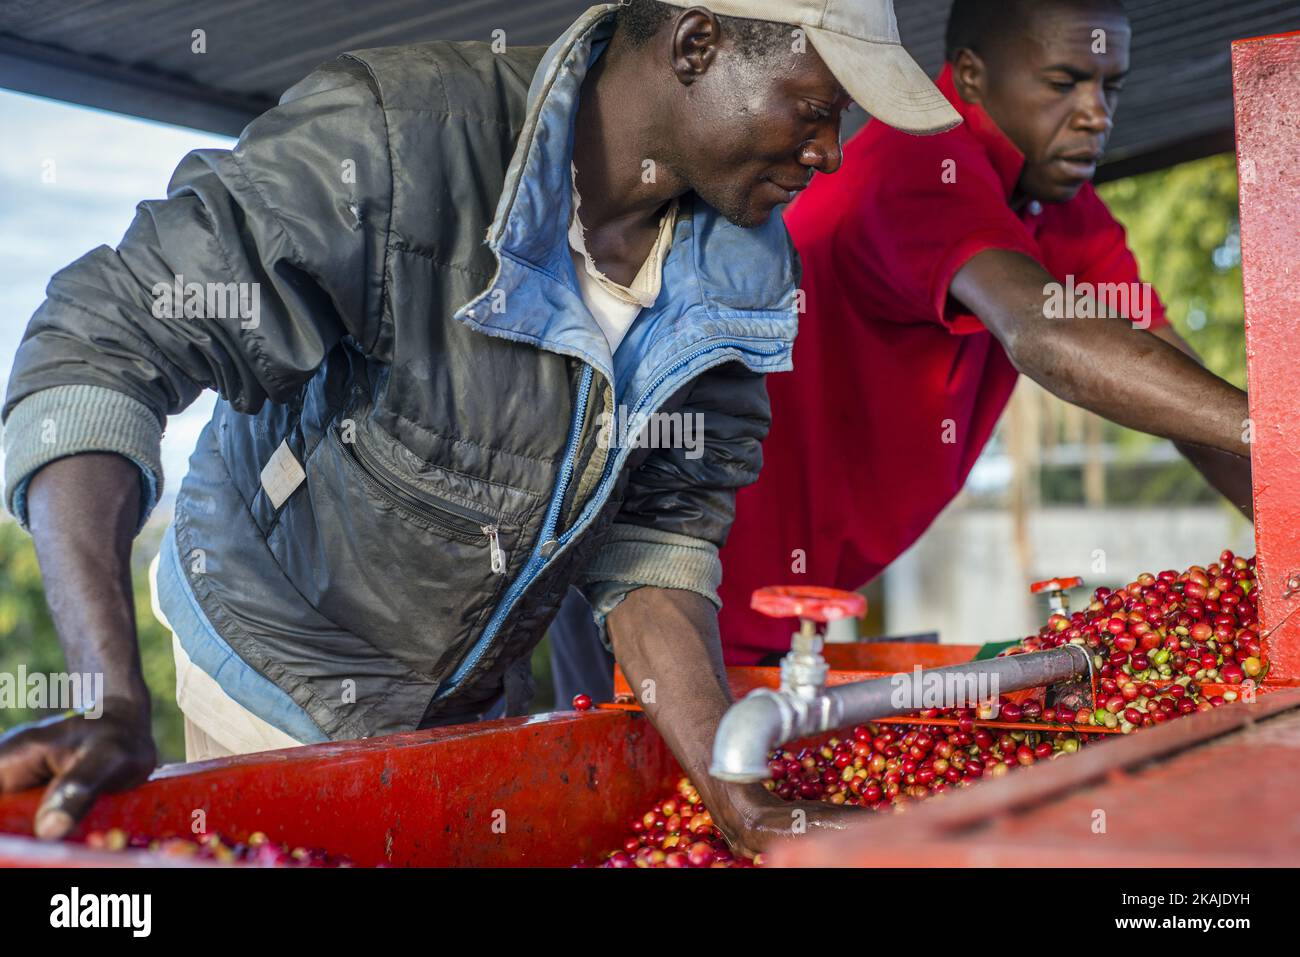 Workers of the Mubuyu Farm, Zambia, use a coffee pulper to remove red skin from coffee beans. The pulp is composted and used as an ecological fertilizer. Mubuyu farm is the largest producer of coffee in Zambia and the only private one. It belongs to Willem Lublinkhof who came to the country 45 years ago with the Dutch development service. Because coffee products are not very popular among Zambians, the bulk of it goes for export. There are 65 hectares of land under the coffee plantation today instead of 300 hectares in 2009. The manager of the coffee production Monday Chilanga says that the ma Stock Photo